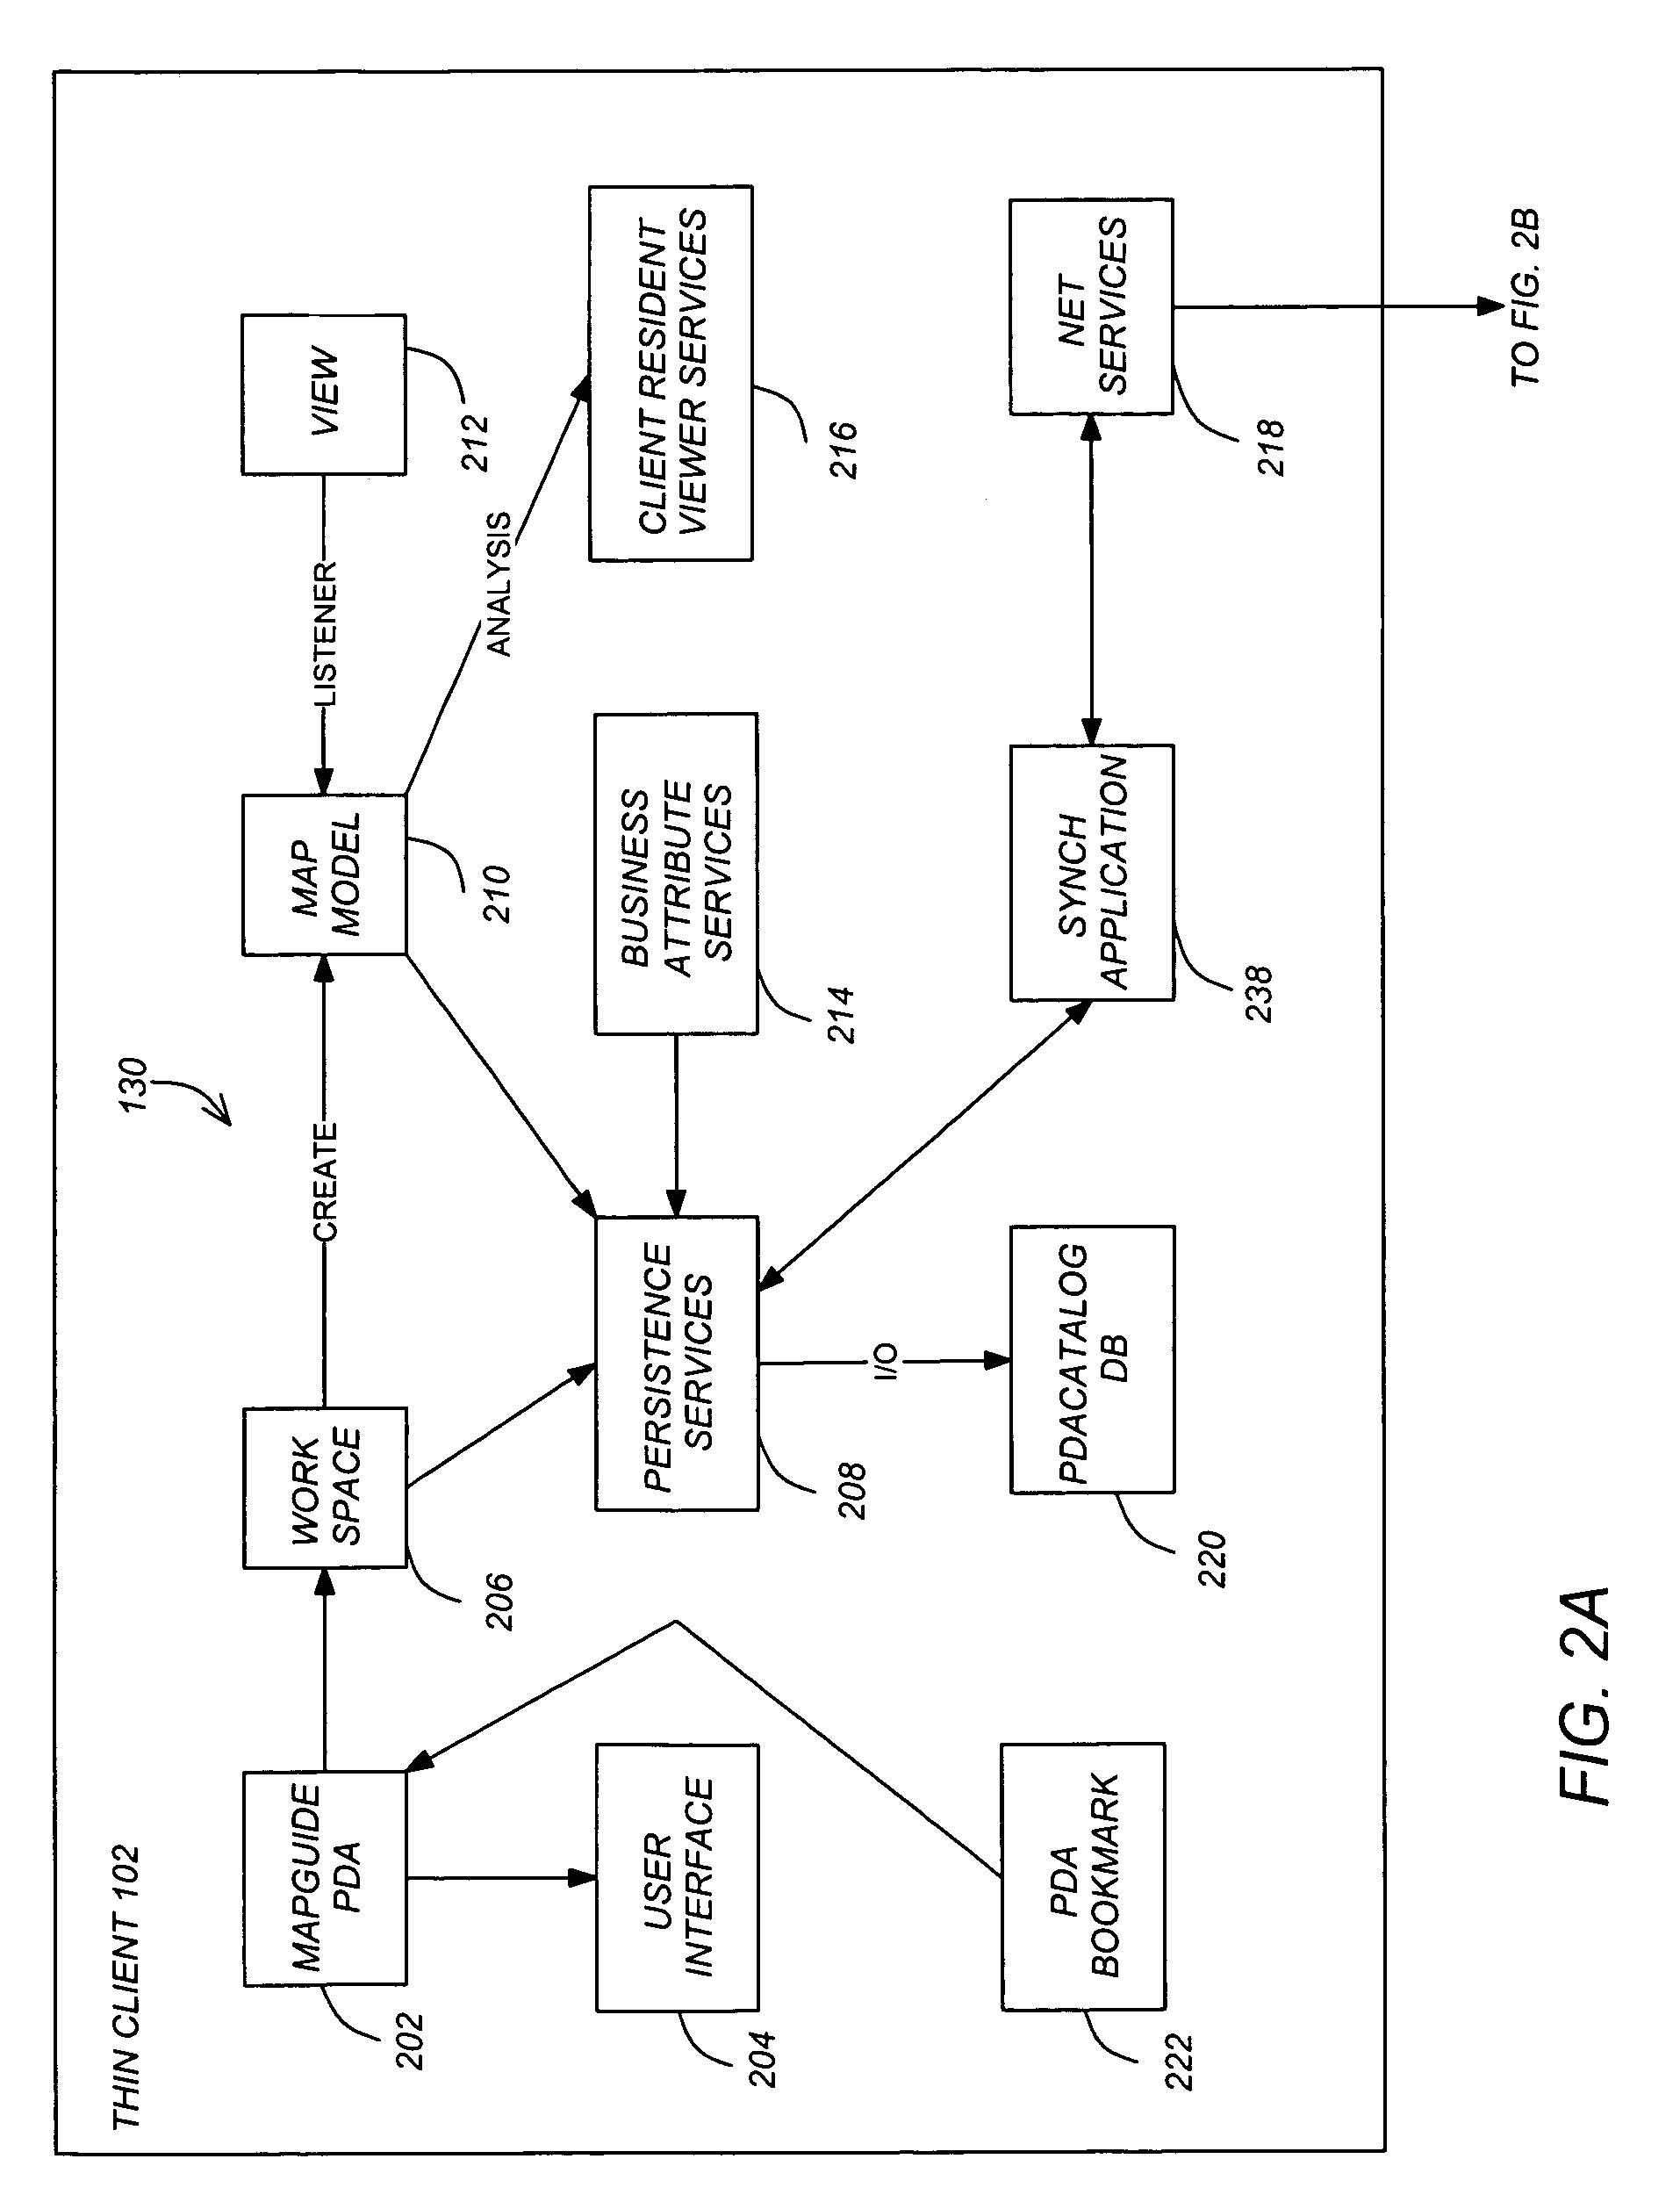 Single gesture map navigation graphical user interface for a personal digital assistant